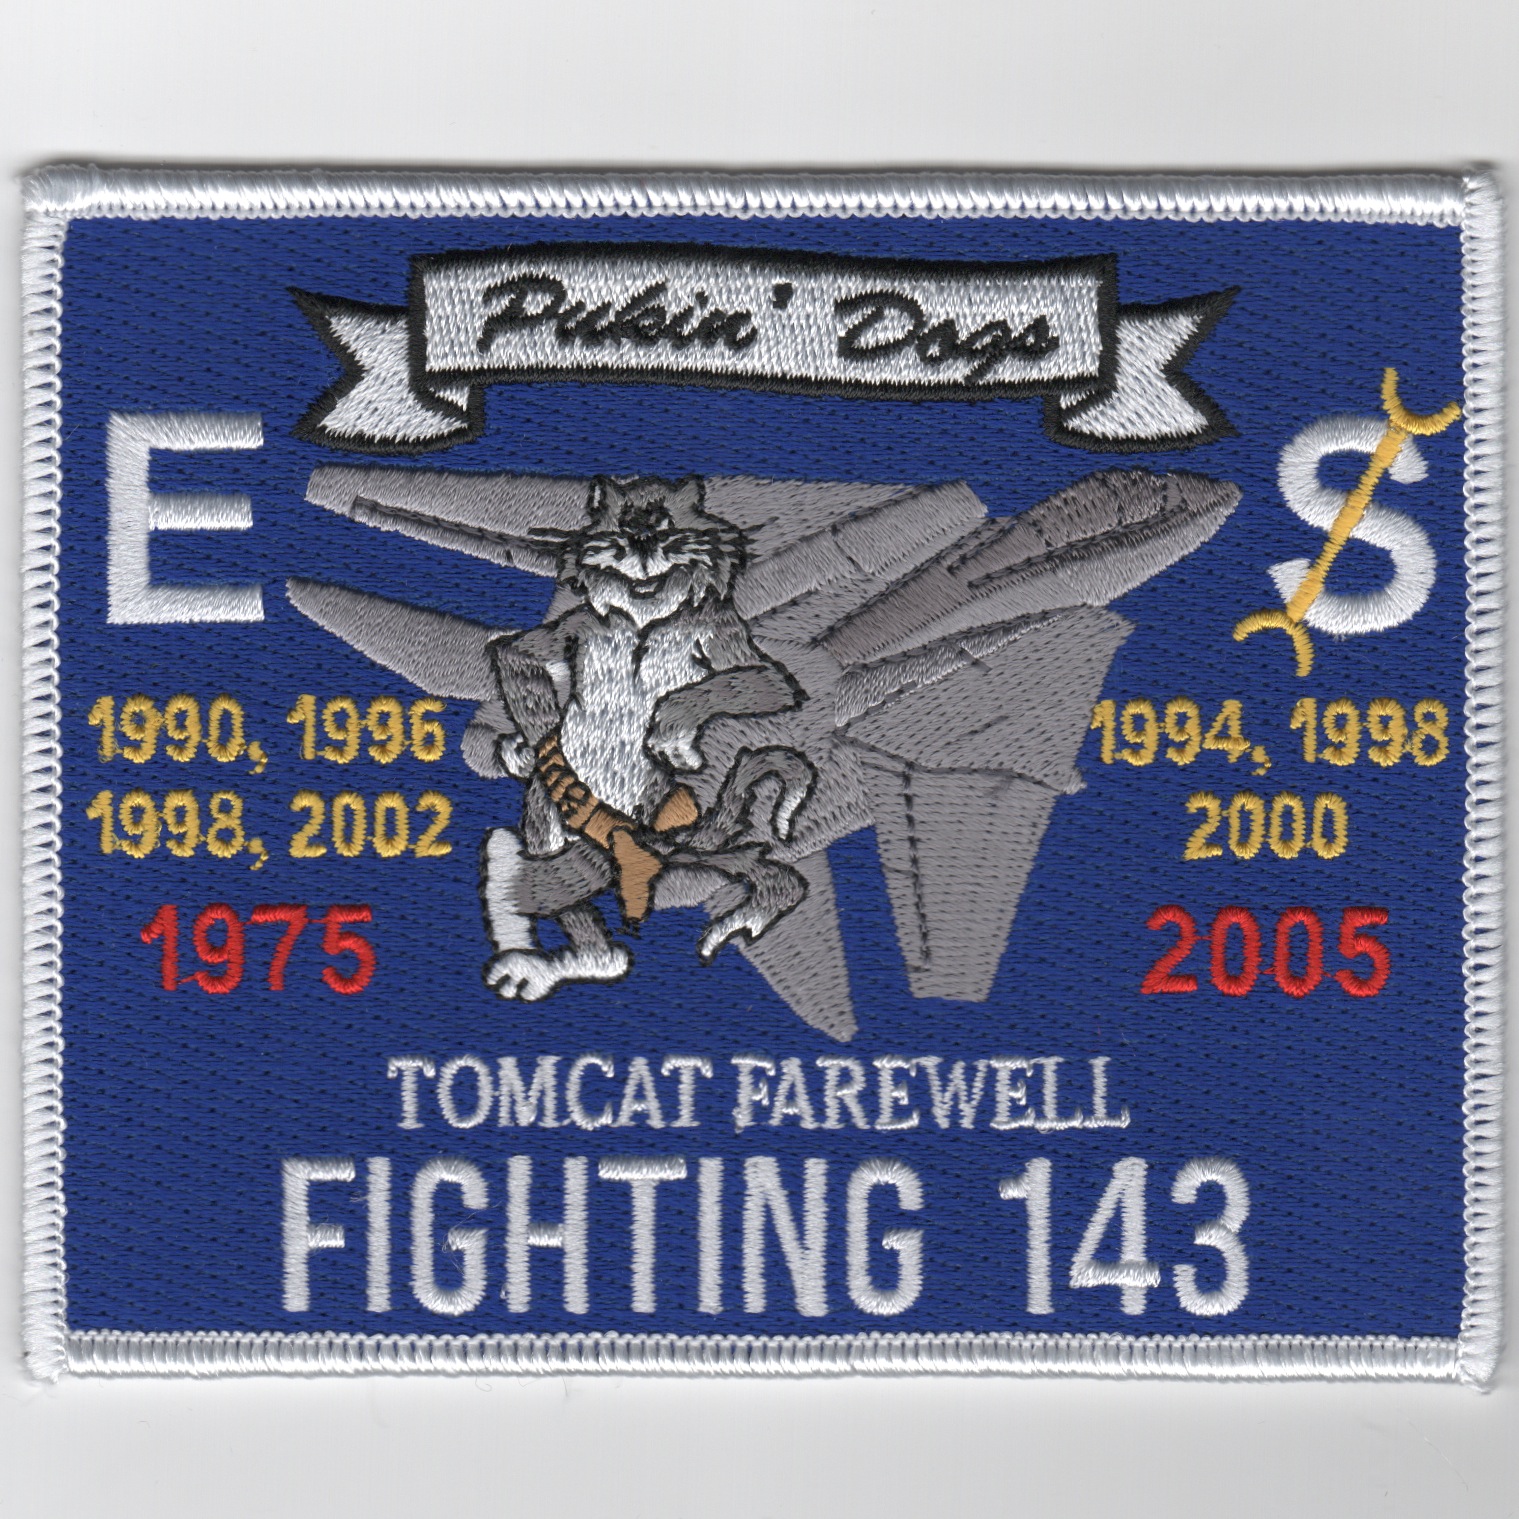 VF-143 2005 'Farewell' Patch (Rect/White Border)